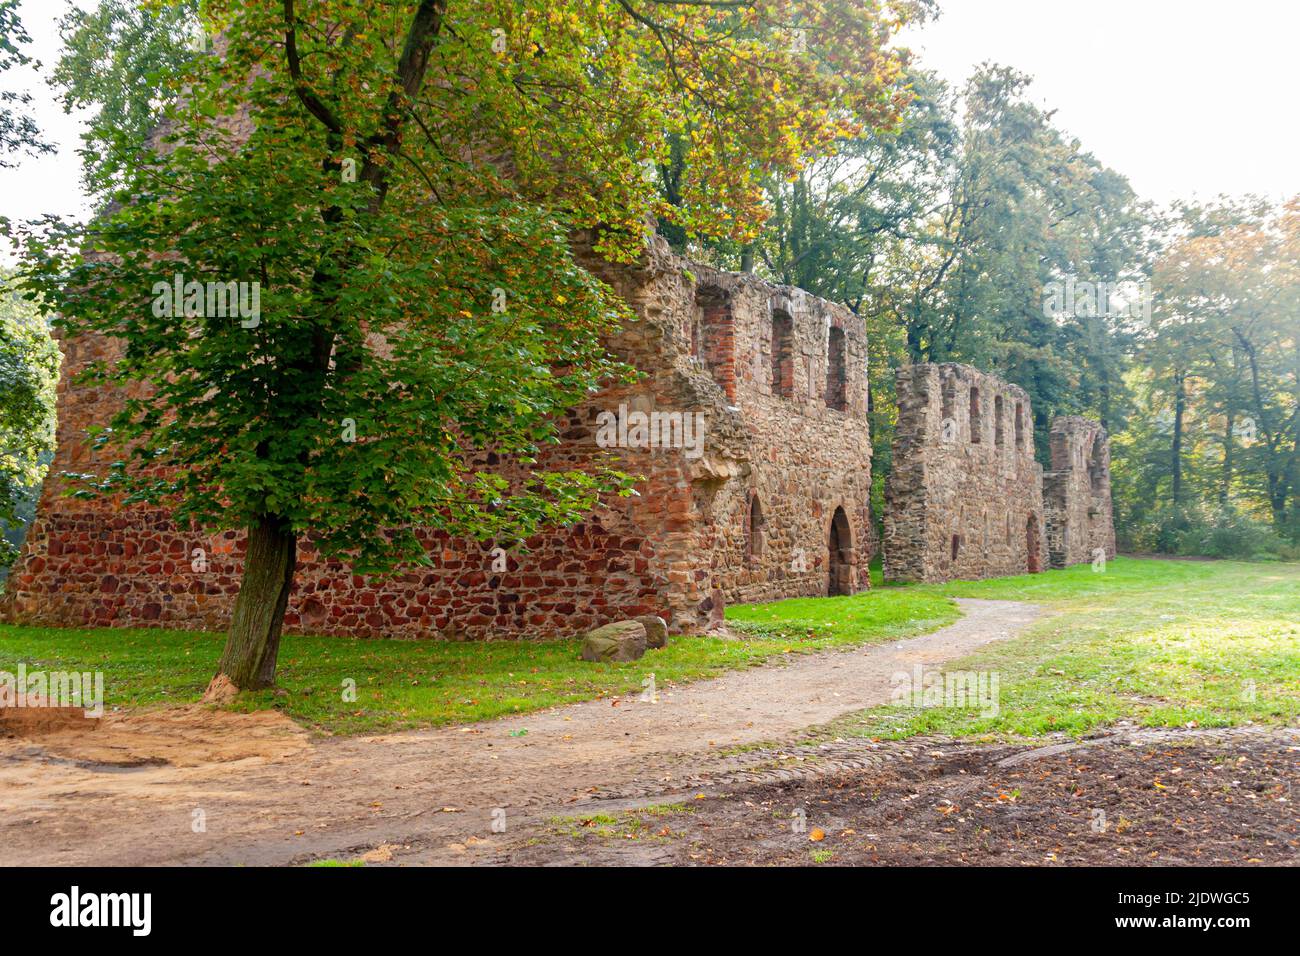 The ruins of the monastery church in Nimbschen, a former Cistercian abbey near Grimma in the Saxon district of Leipzig on the Mulde River in Germany. Stock Photo